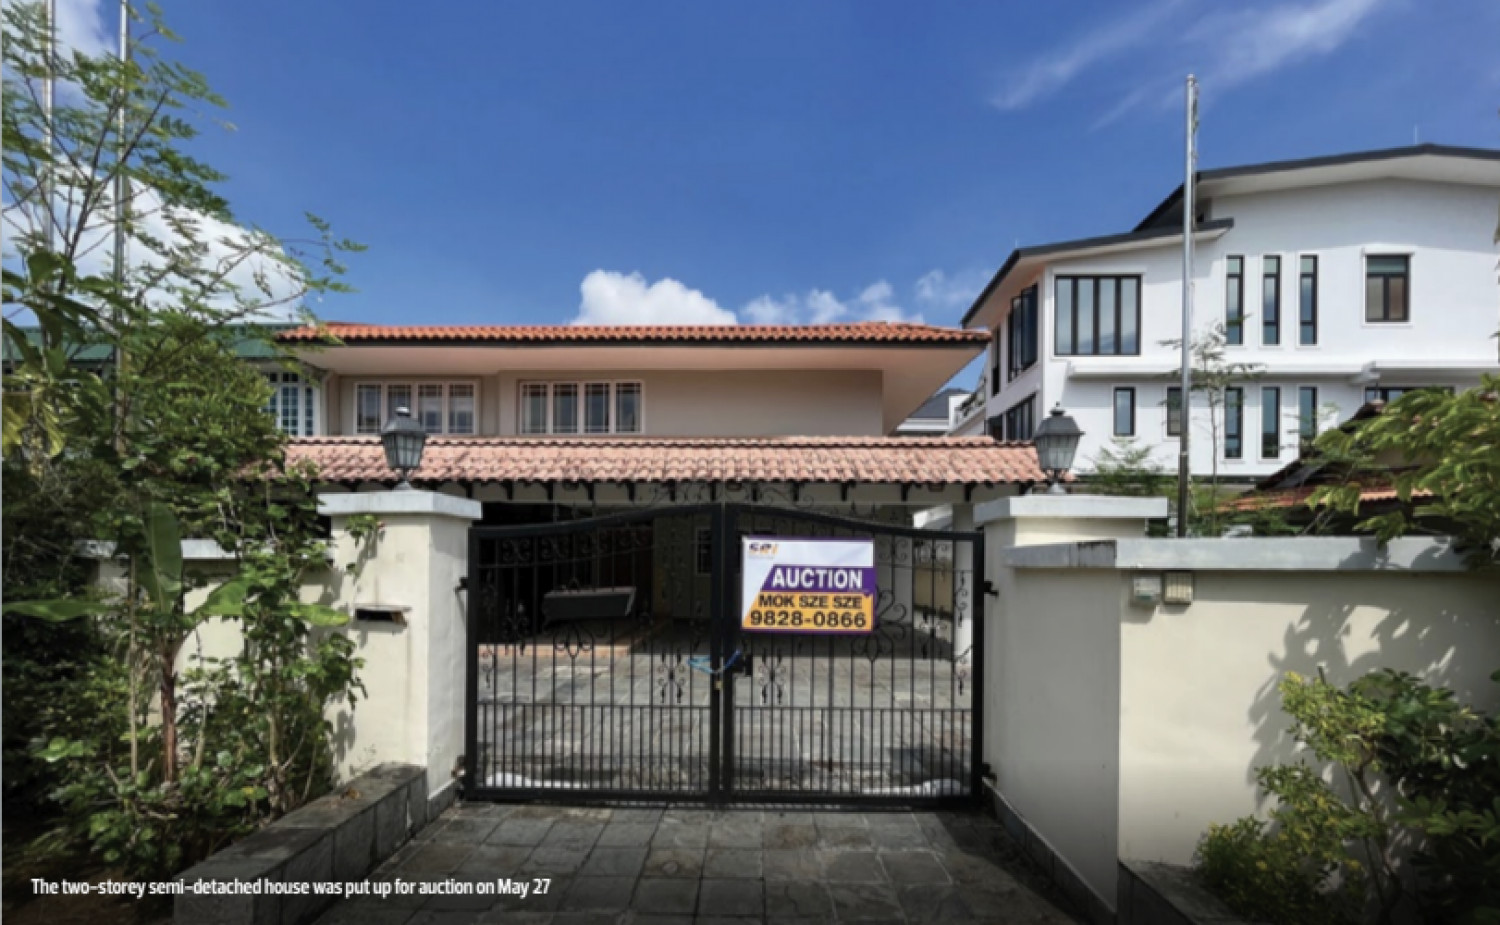 Liquidator sale of freehold semi-detached house on Jalan Tanah Puteh for $7.5 mil - Property News